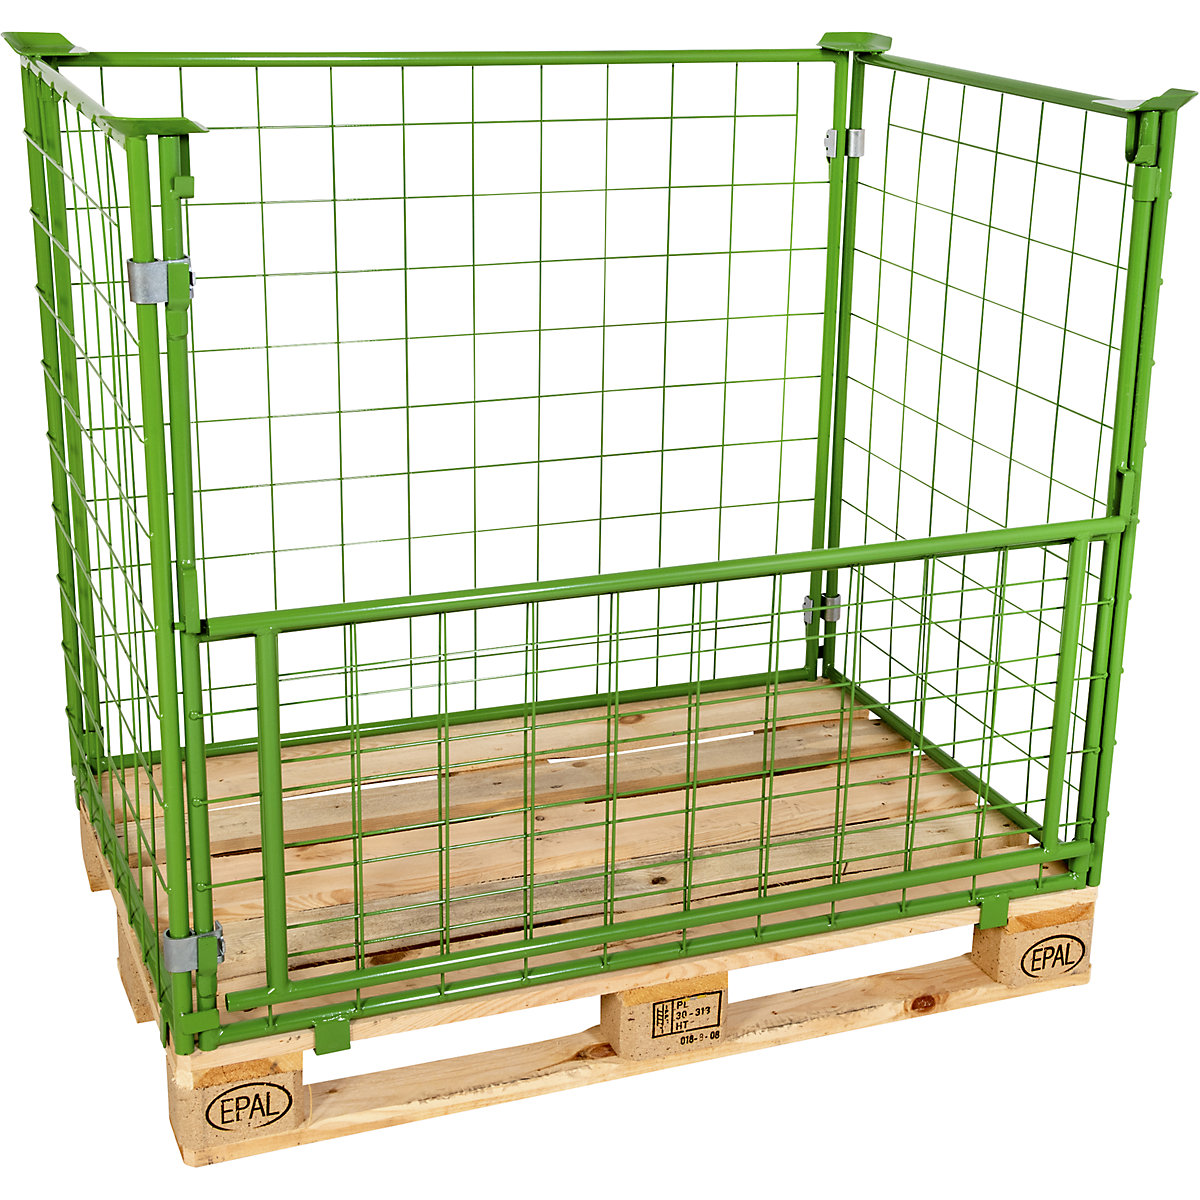 Mesh stacking frame for EUR pallet – eurokraft basic, with flap, mesh size 100 x 100 mm, height 800 mm, green-1